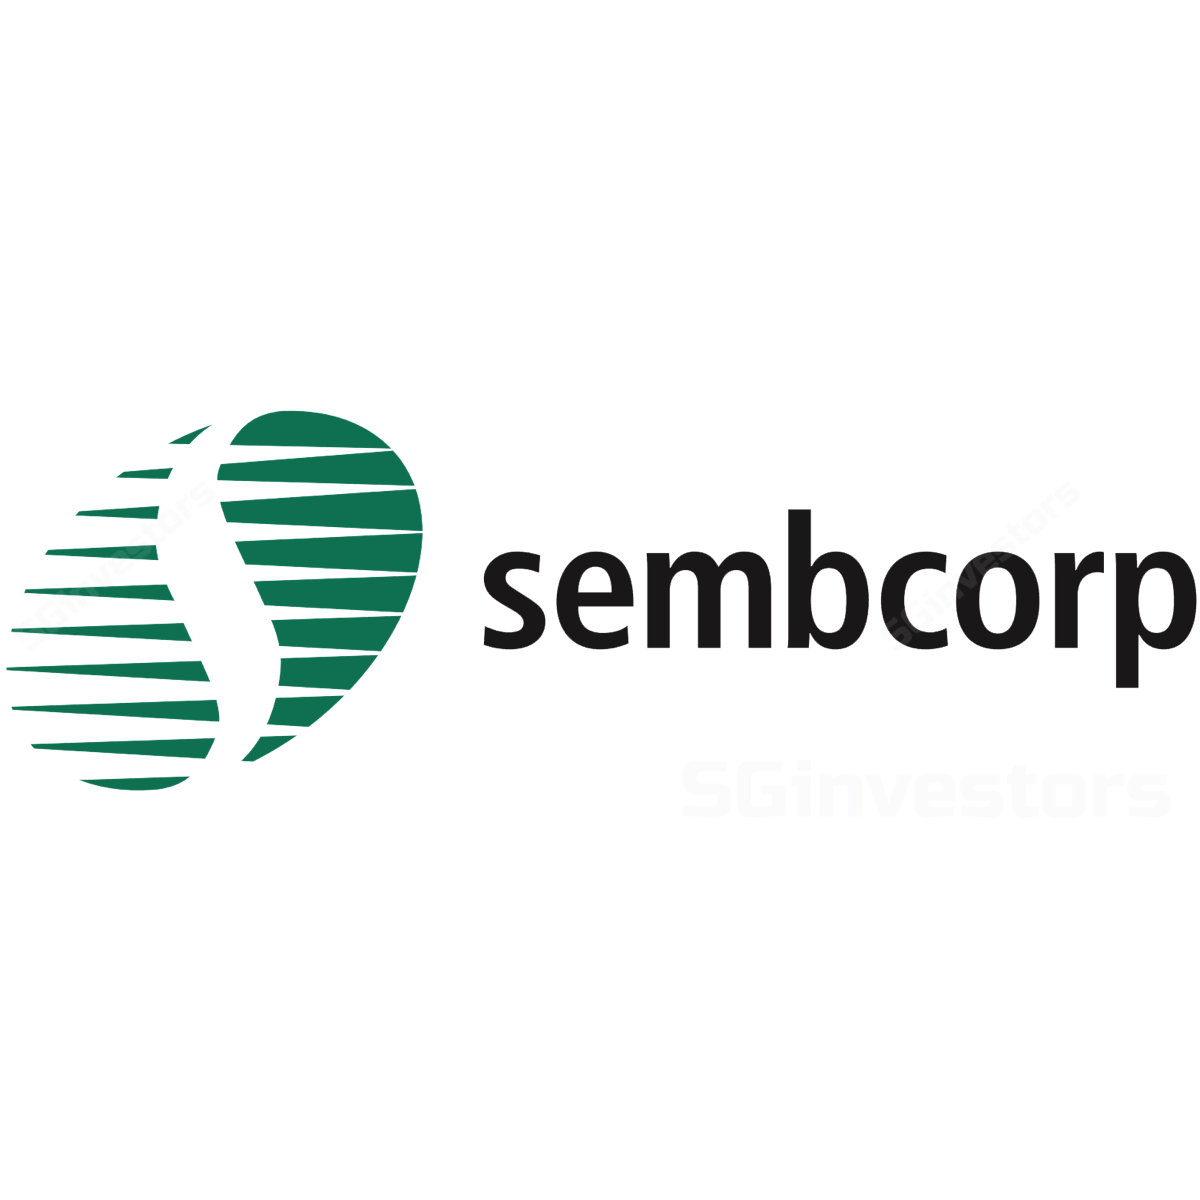 Sembcorp Industries - DBS Vickers 2016-12-02: Riding on oil recovery